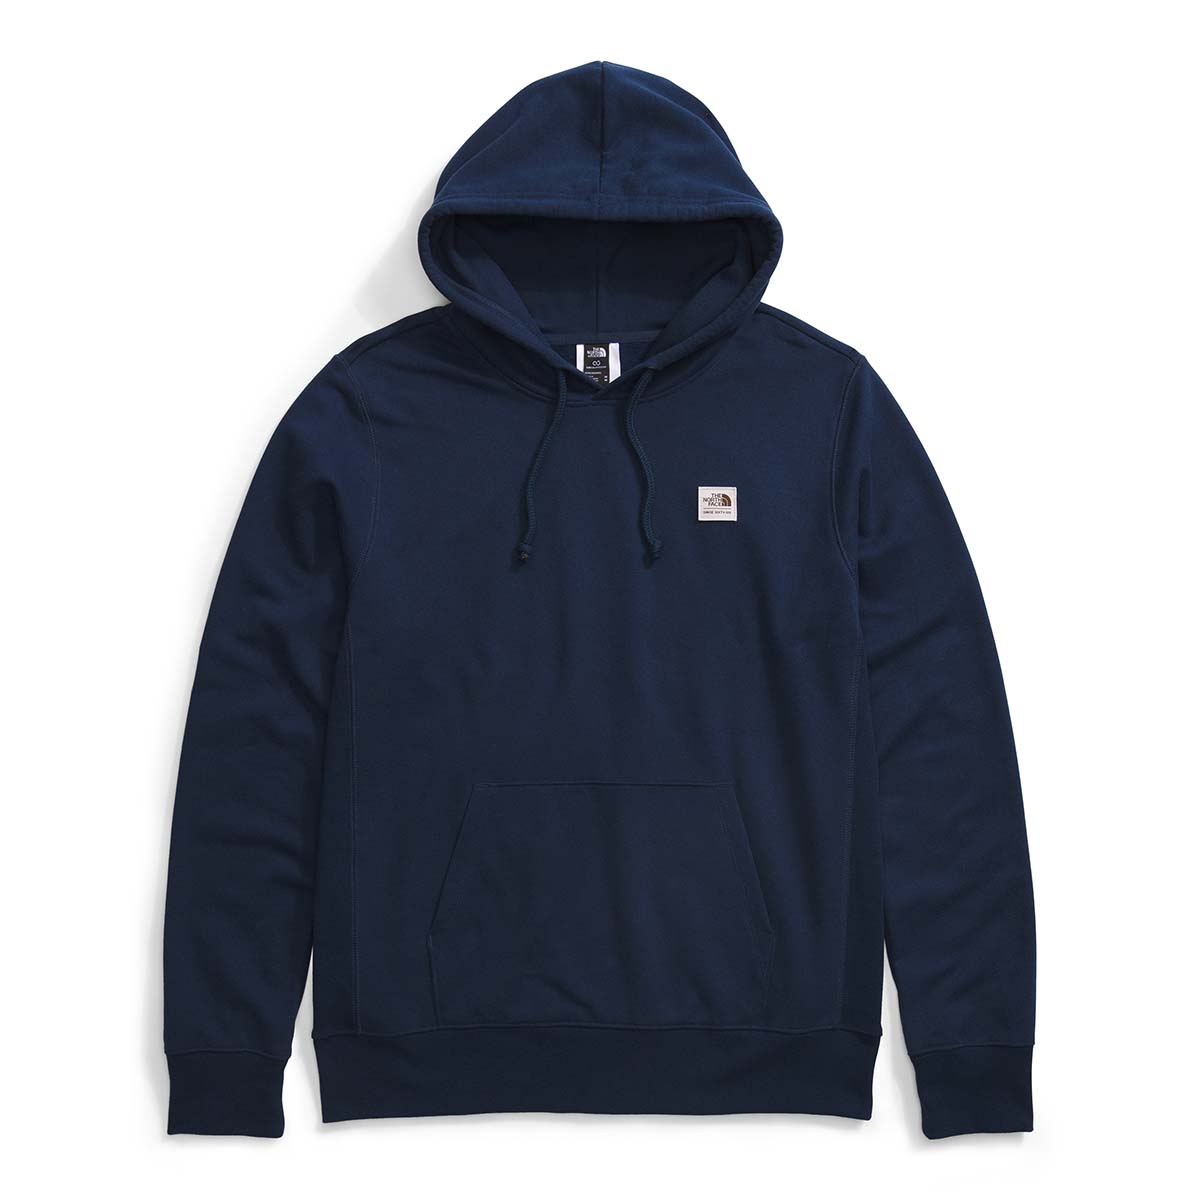 The North Face Men's Heritage Patch Hoodie